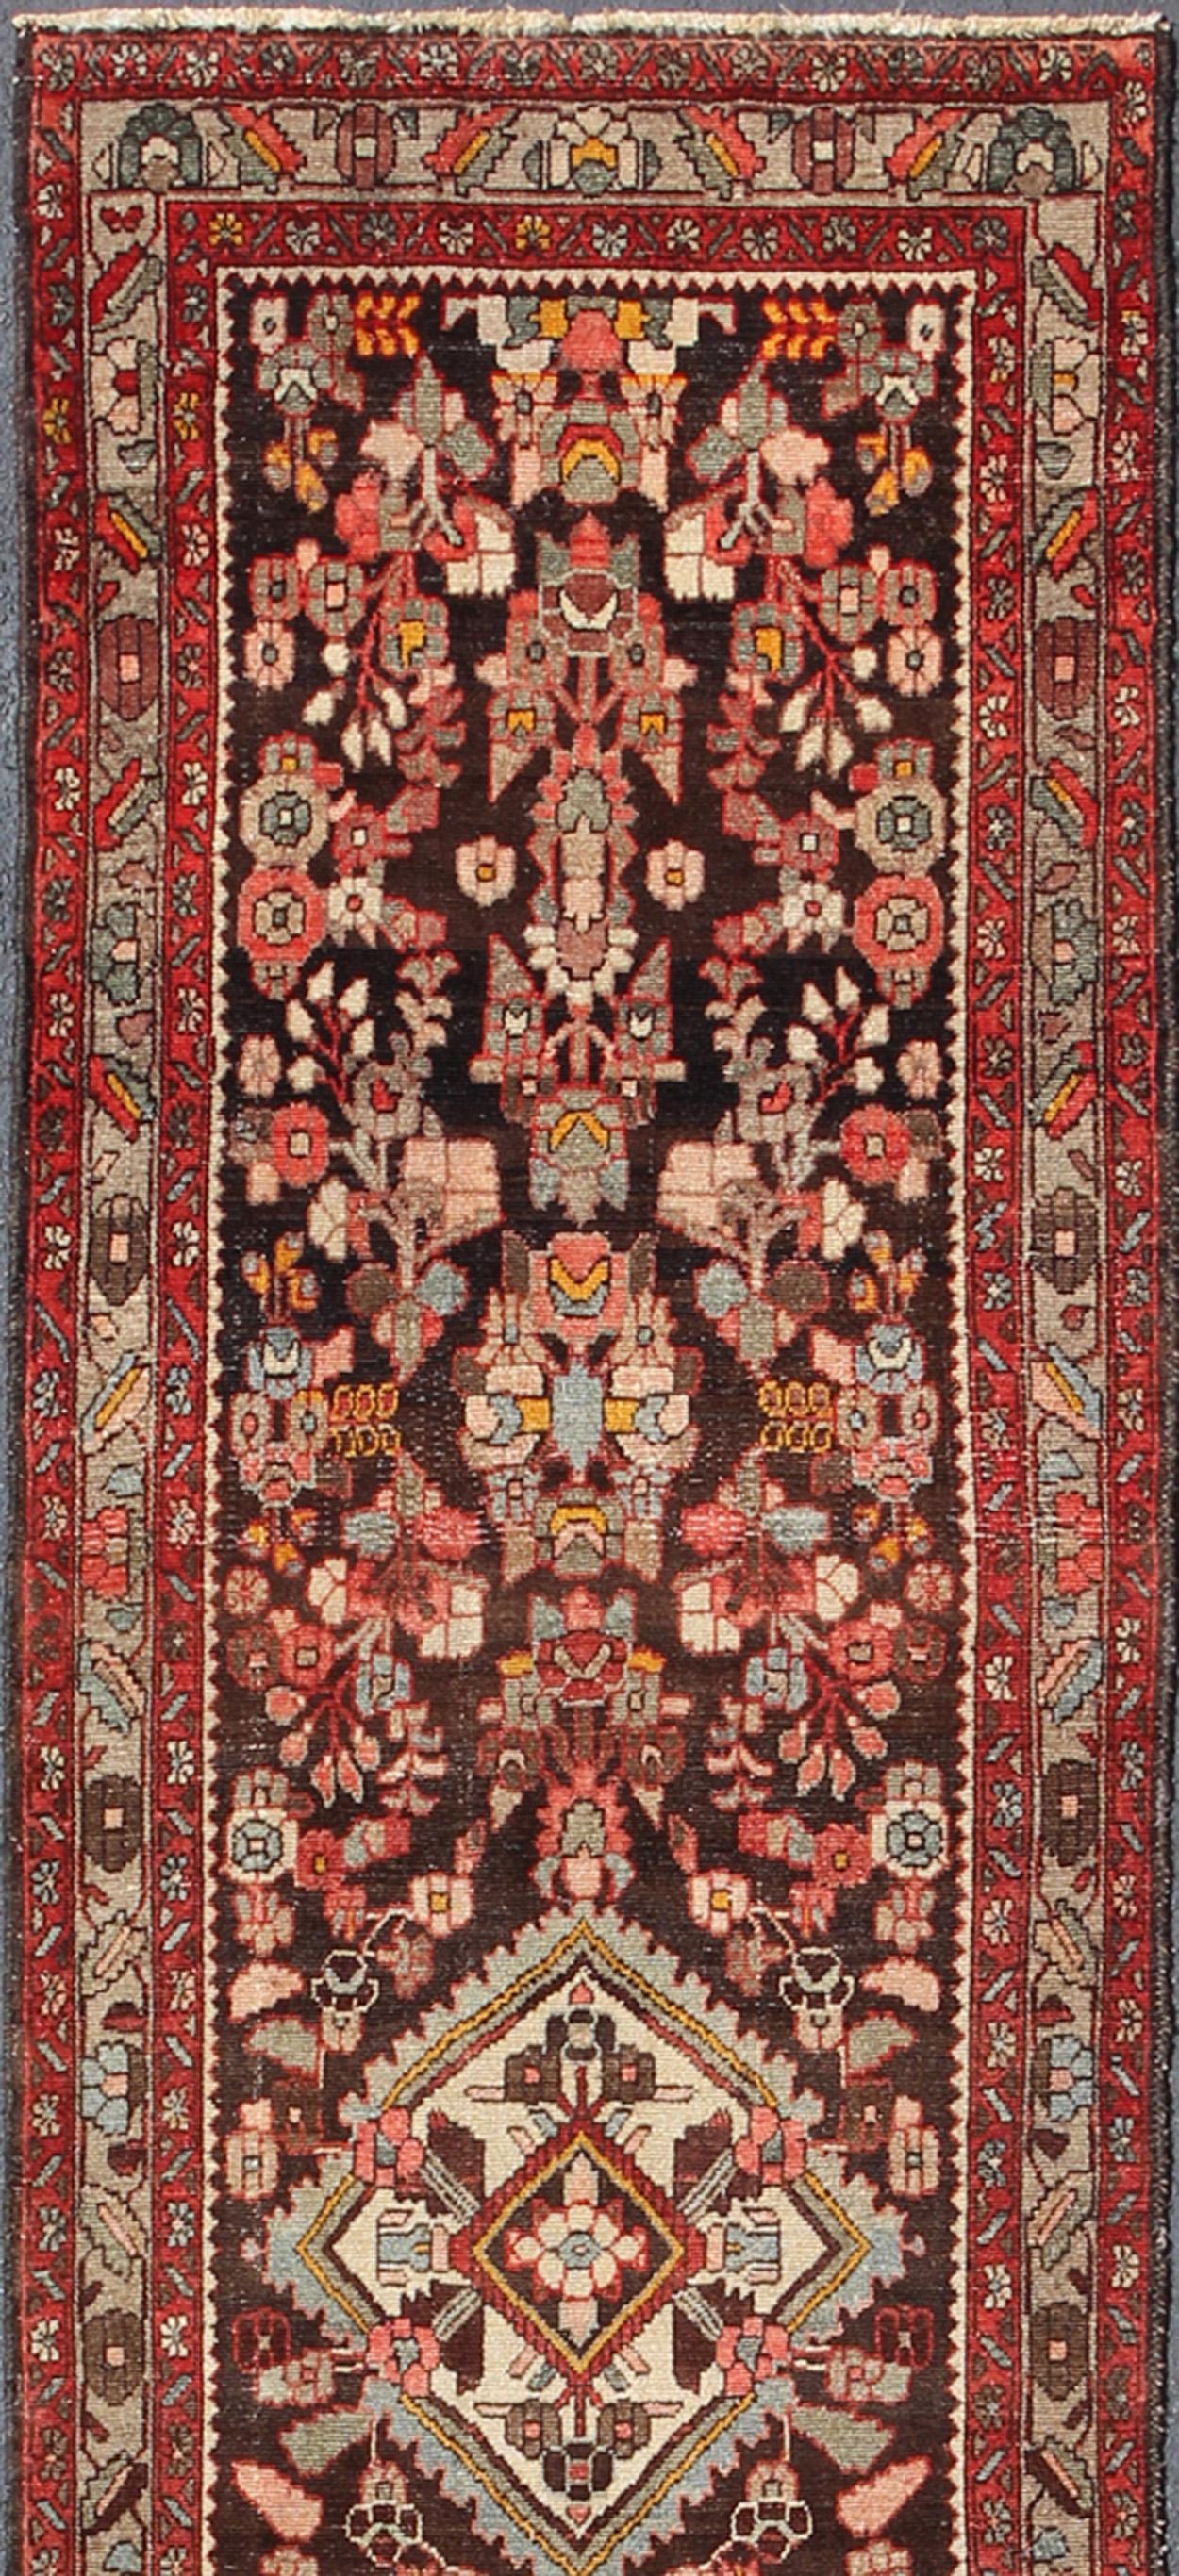 Antique Hamadan long Runner- H-702-17, antique Hamadan Runner-this semi antique Hamadan gallery runner (circa mid-20th century) features a unique blend of colors and an intricately beautiful design. The central medallions consist of a vertical line